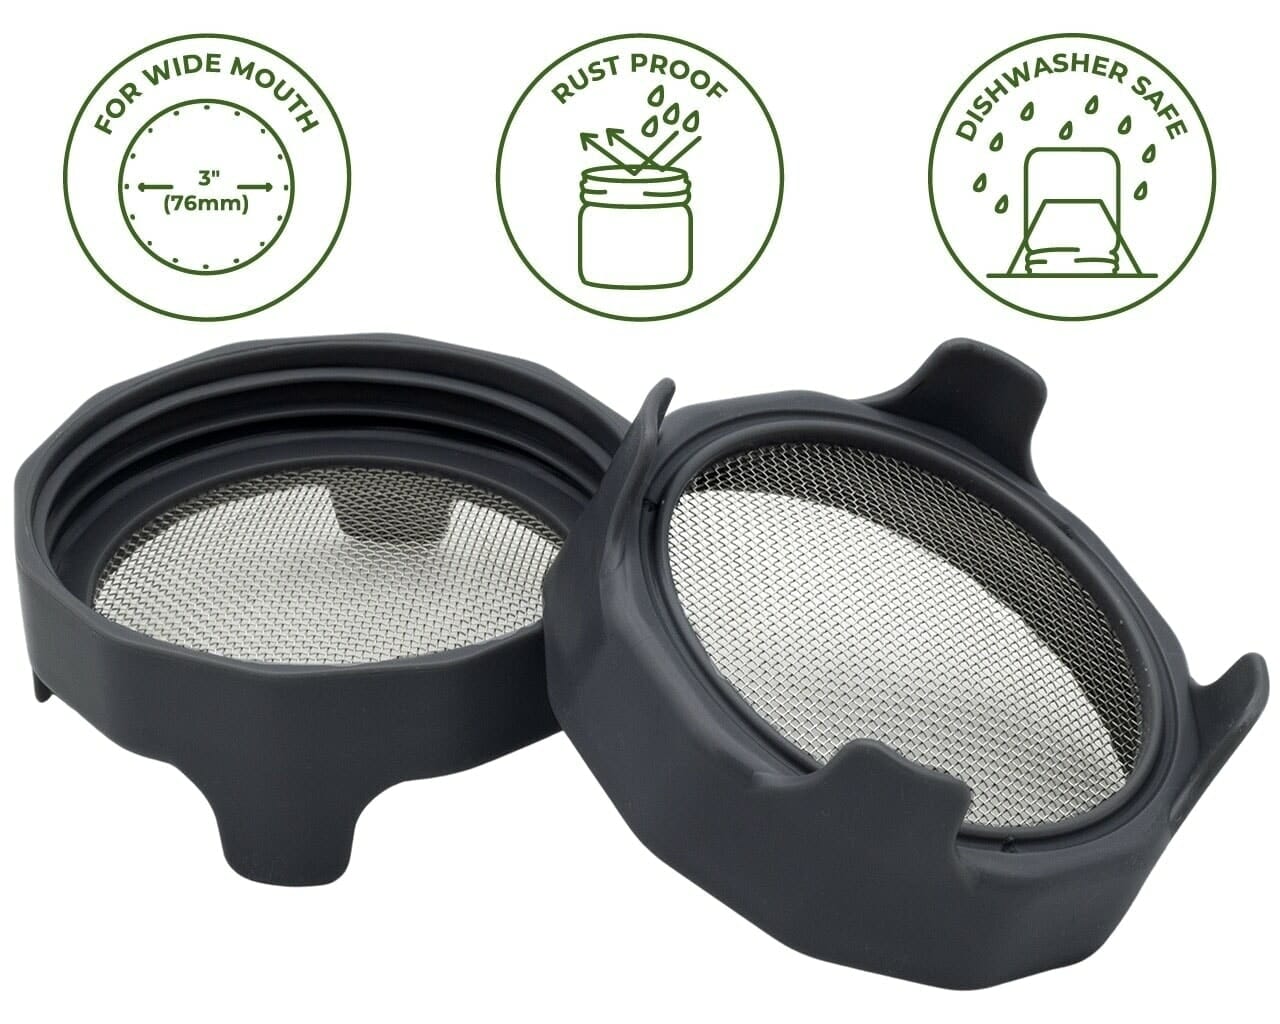 Rust Proof Sprouting Lid with Built-In Stand for Wide Mouth